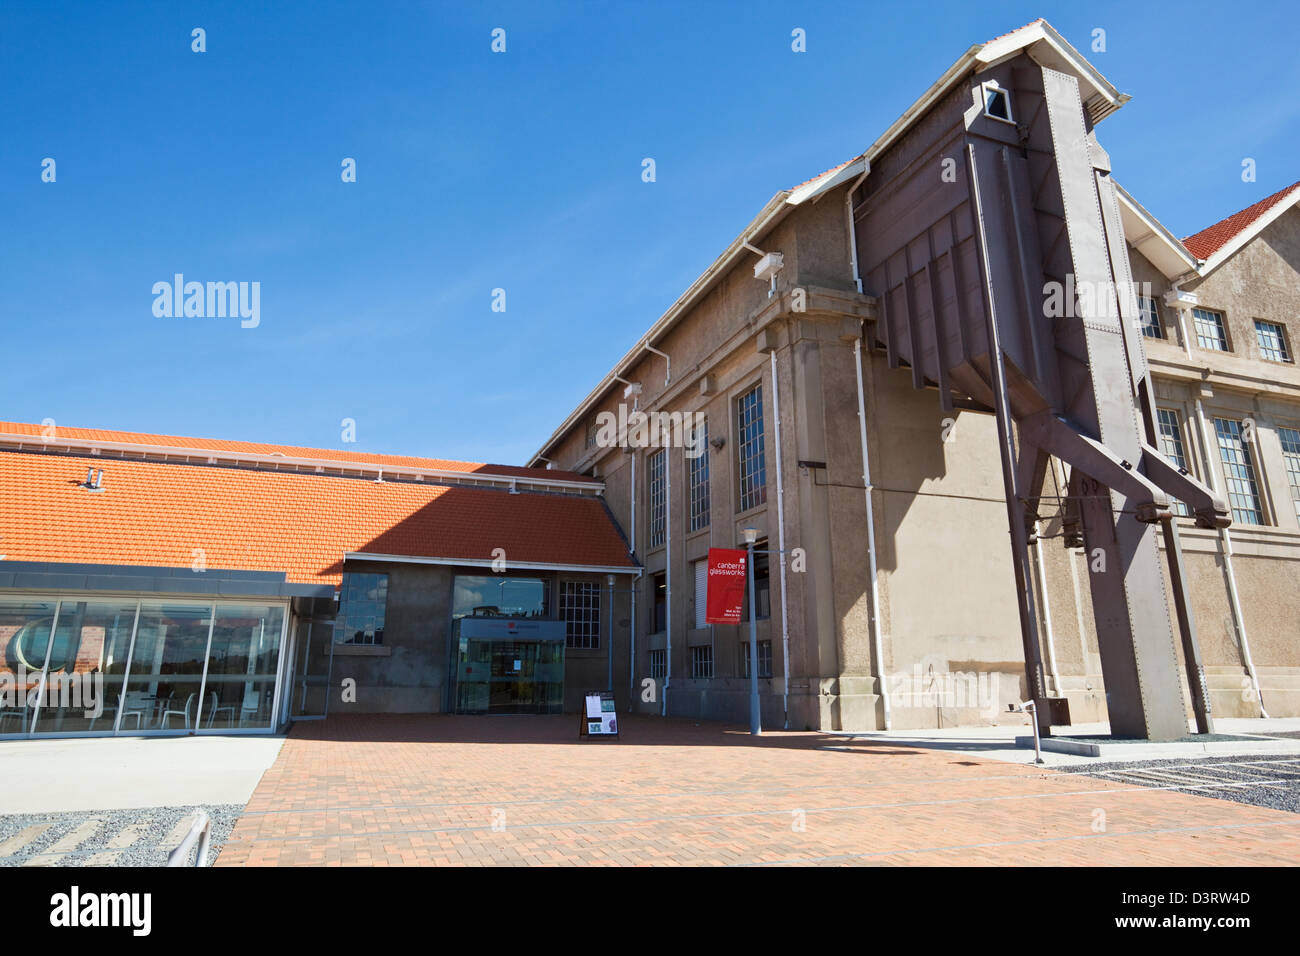 The Canberra Glassworks, housed in the old Canberra Powerhouse building. Canberra, Australian Capital Territory (ACT), Australia Stock Photo